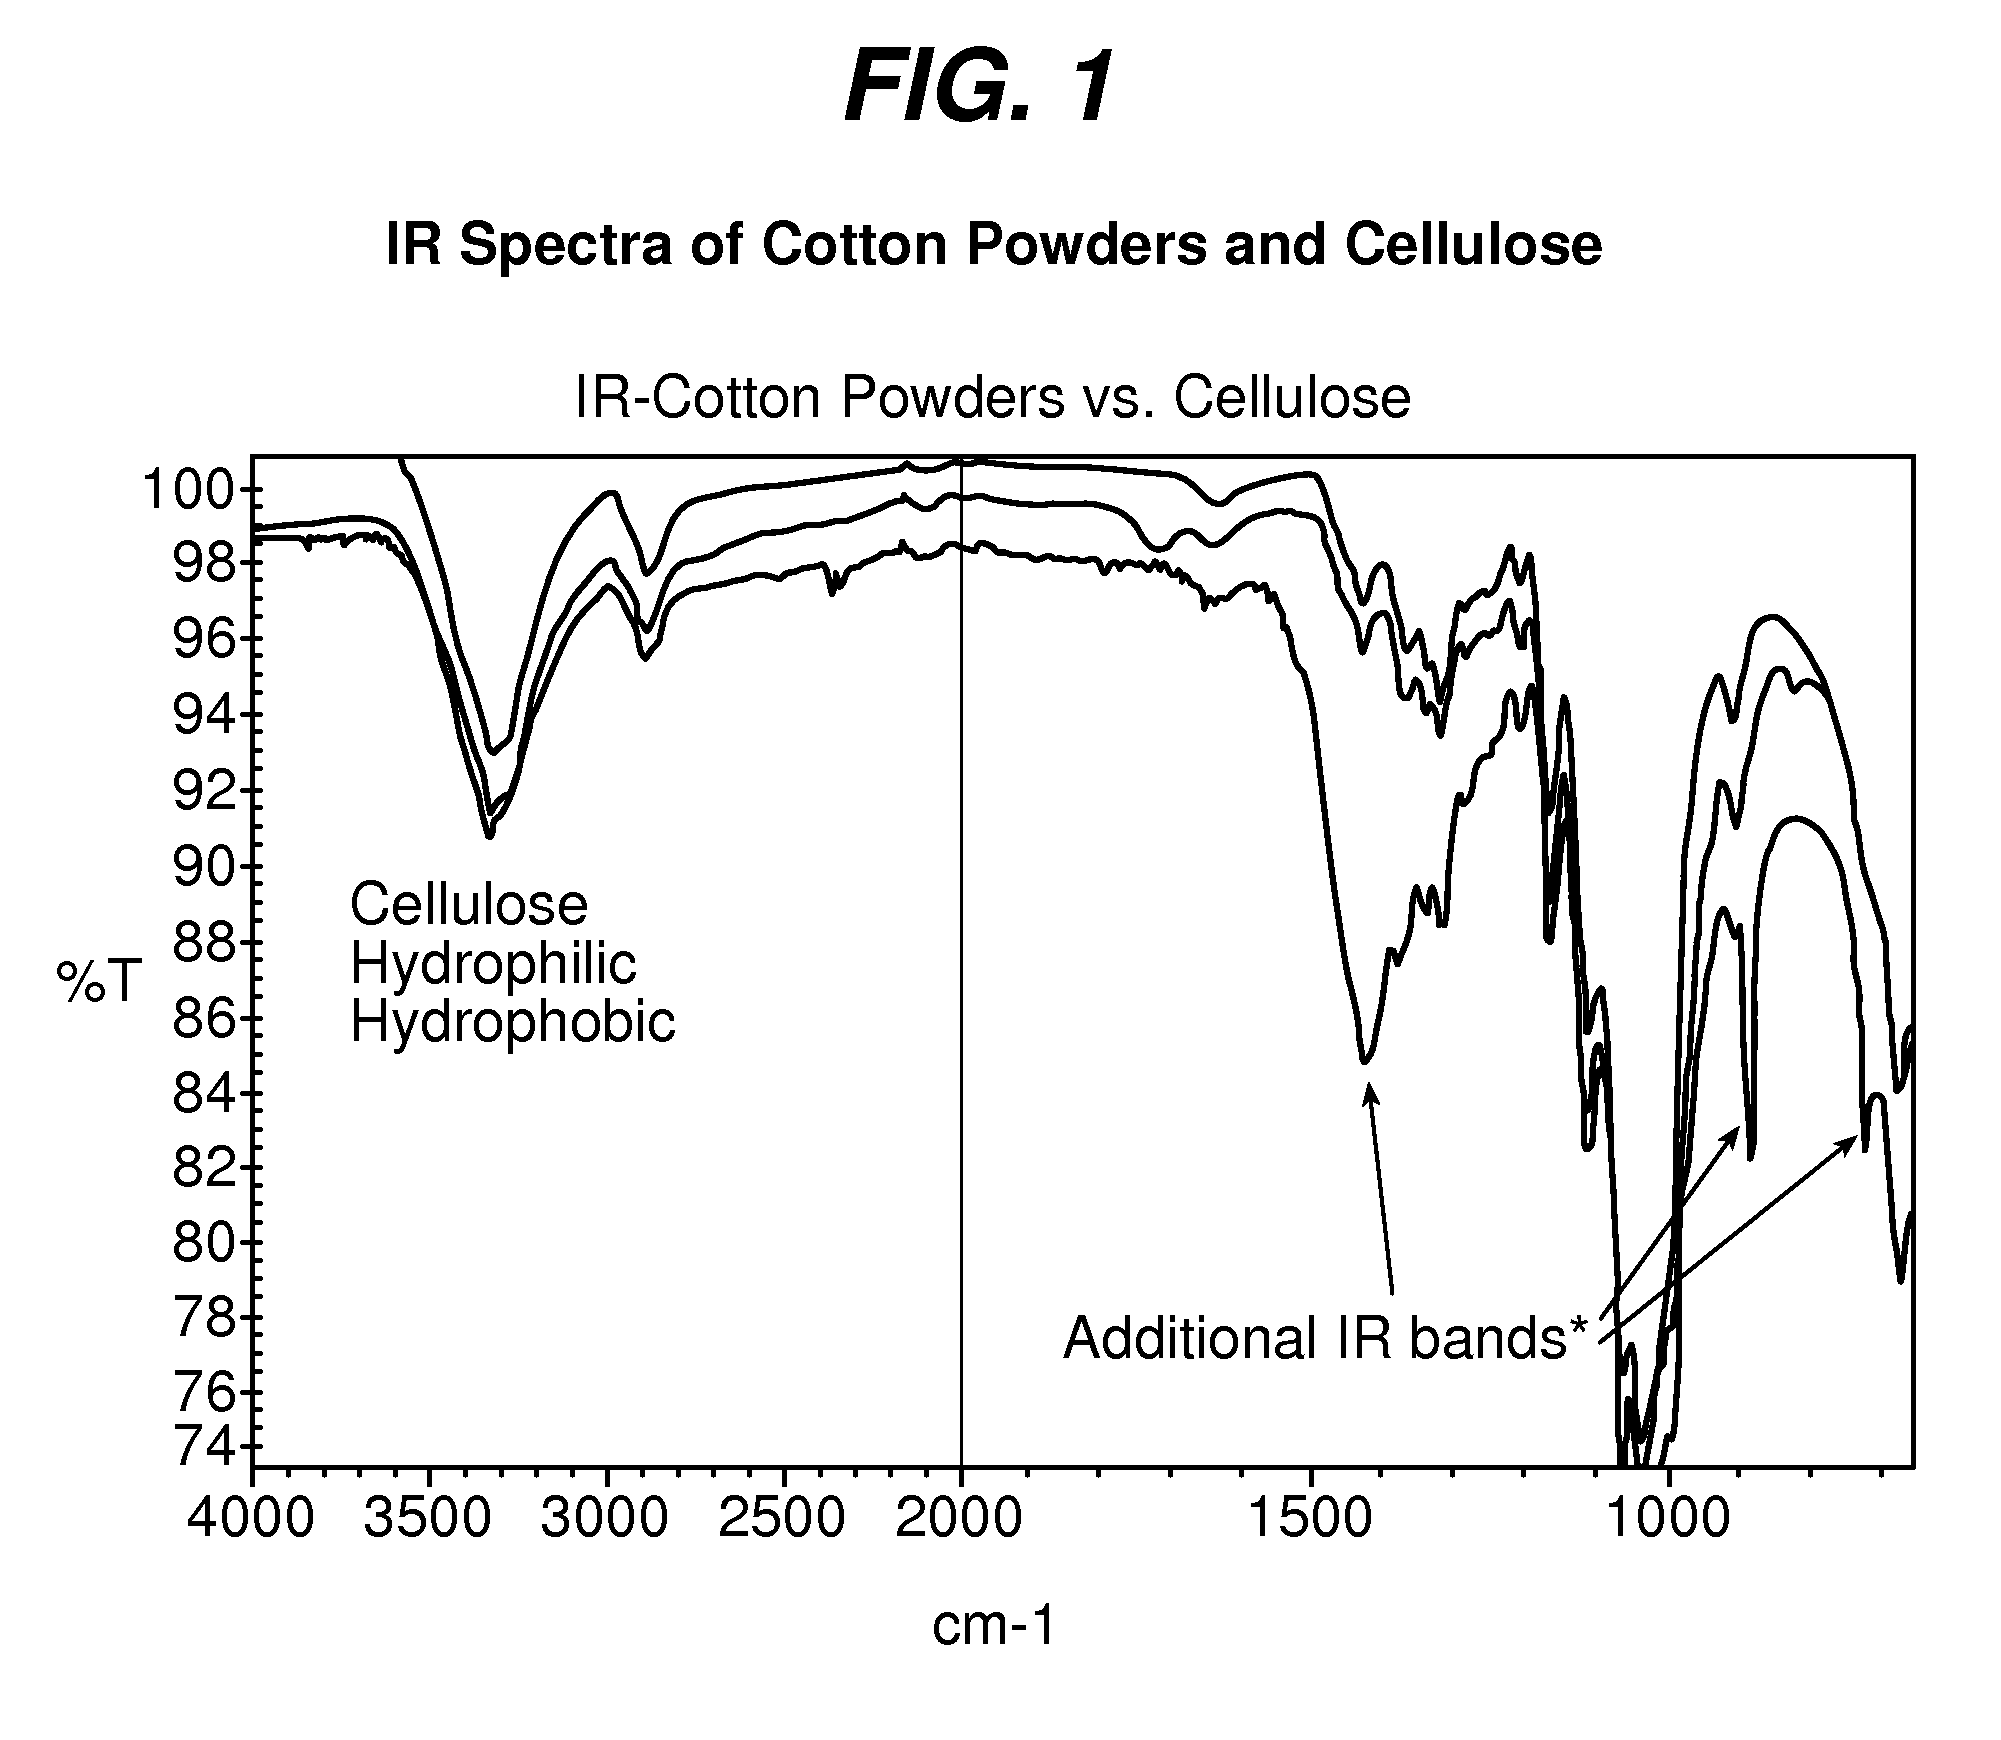 Skin care compositions containing cotton and citrus-derived materials